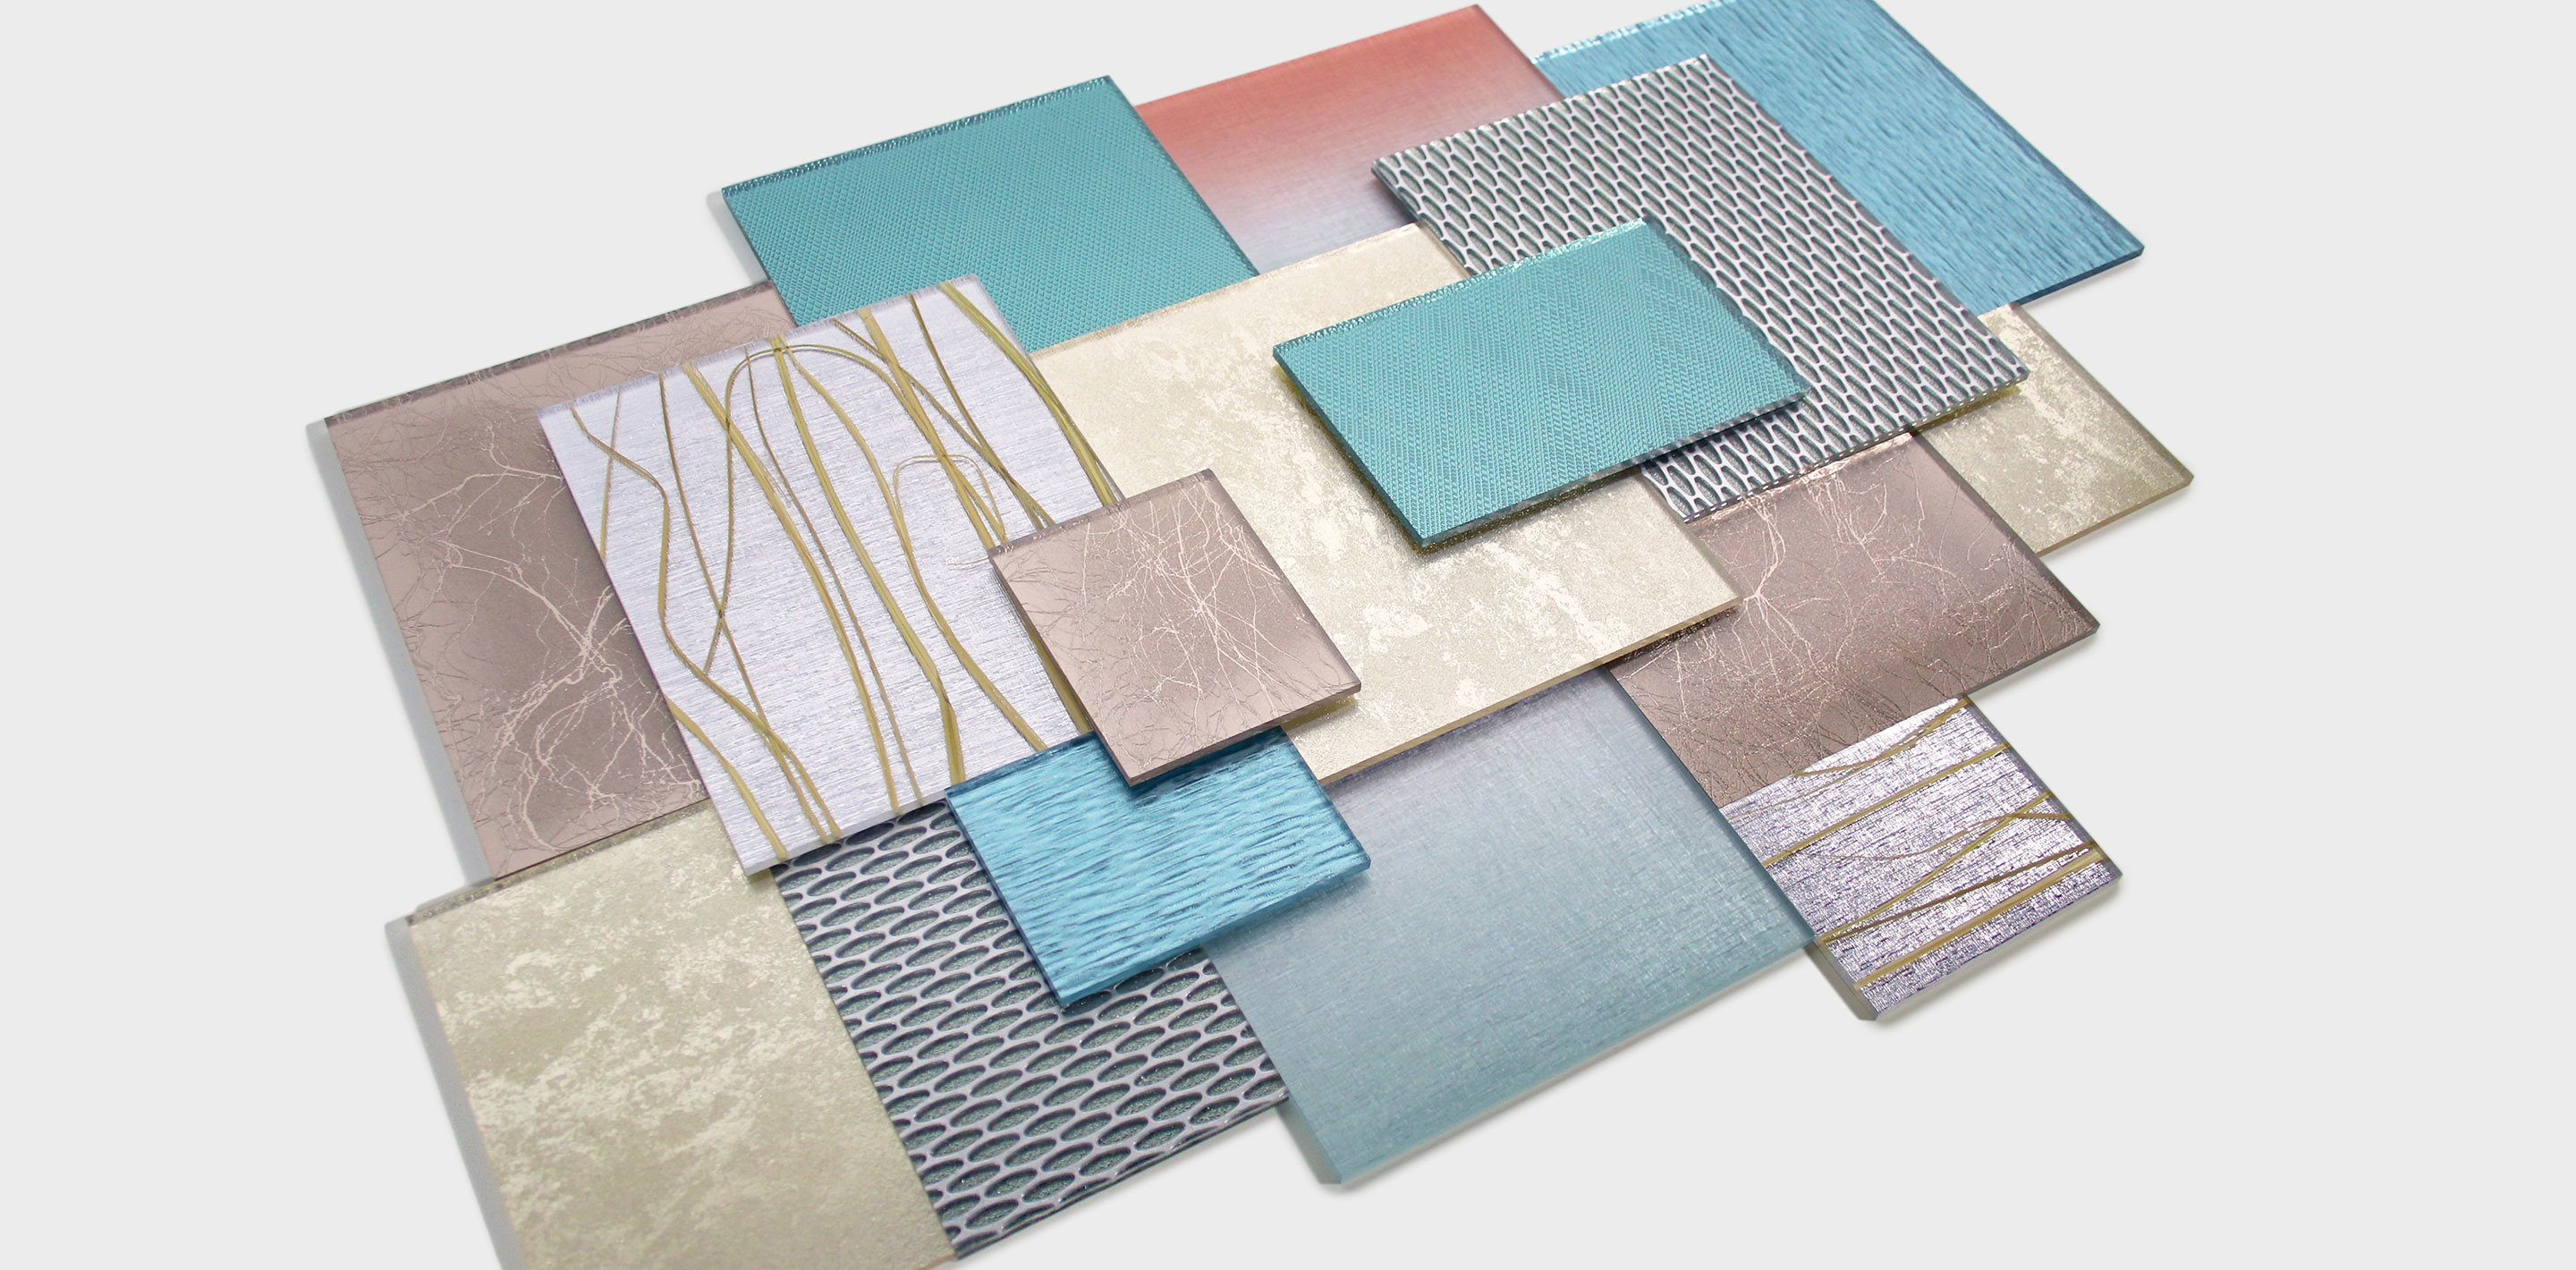 Resin Panel samples are layered on top of each other, showing how Reflective Finishes add-ons pair with décors in various categories.